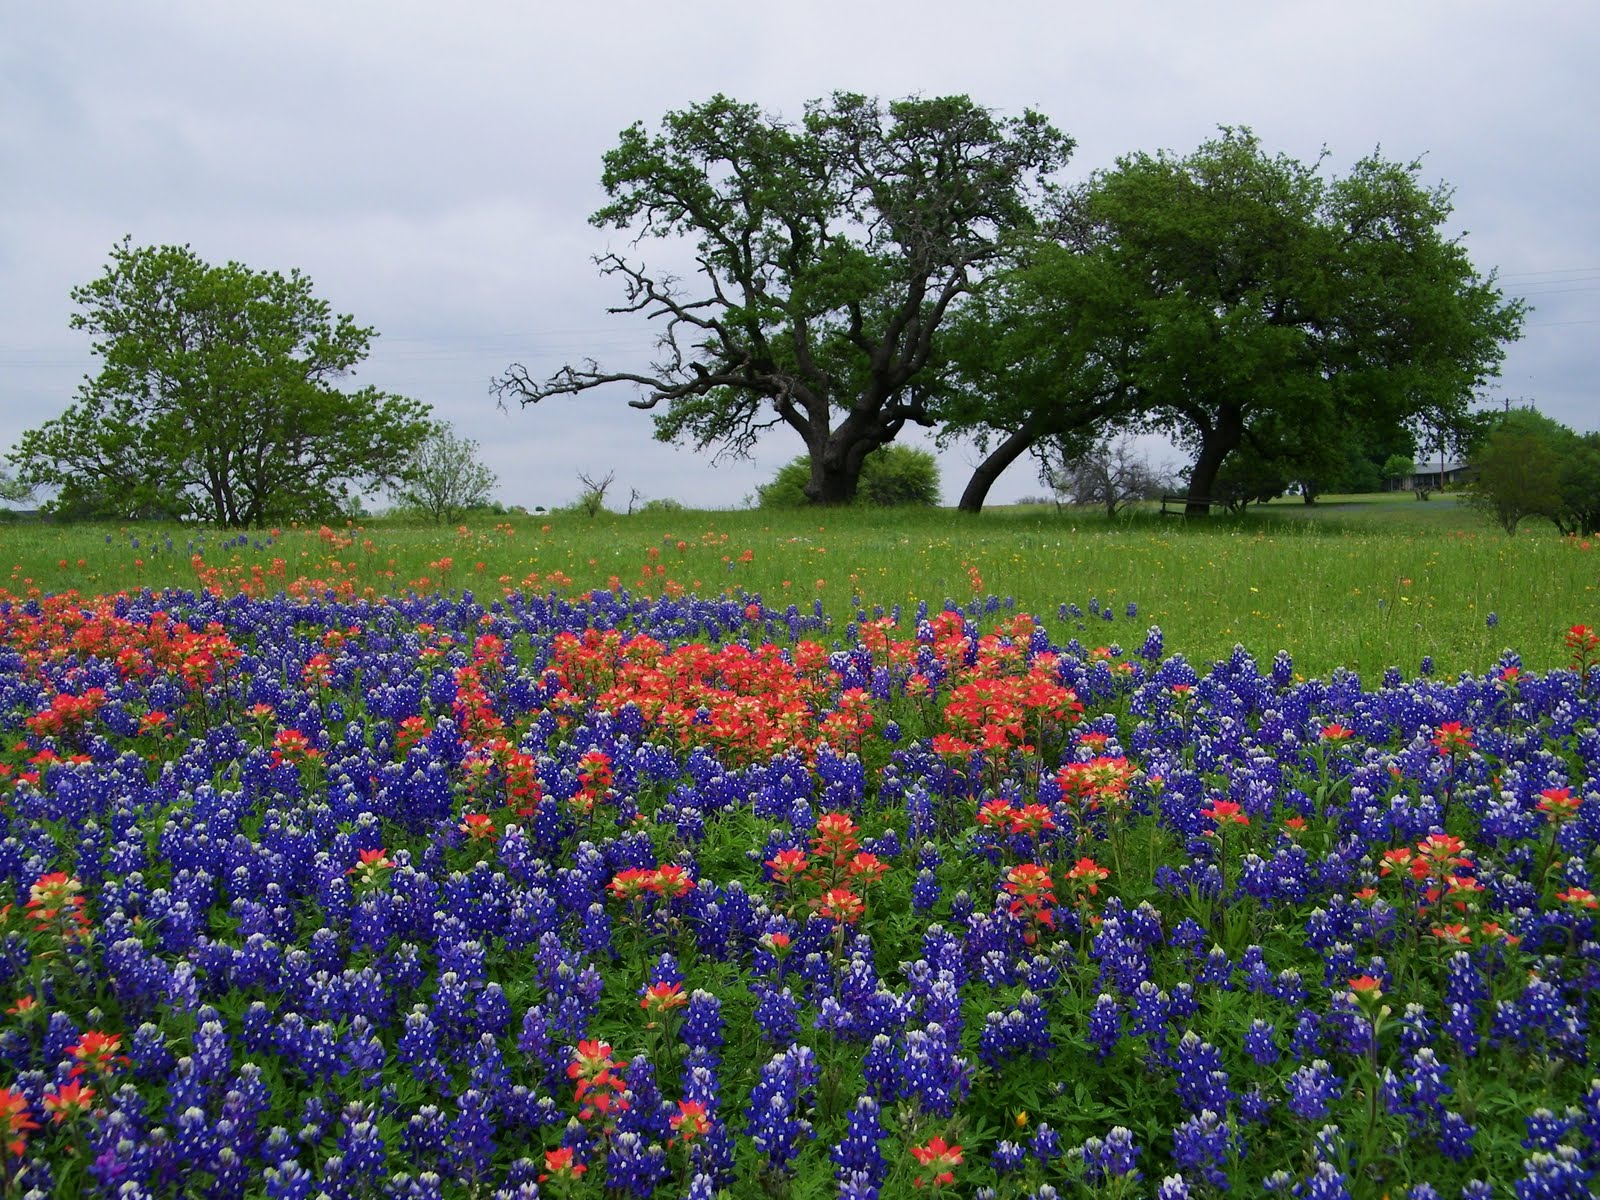 color sheets for kids: Spring Flowers In Texas Images : SWP - Flower ...